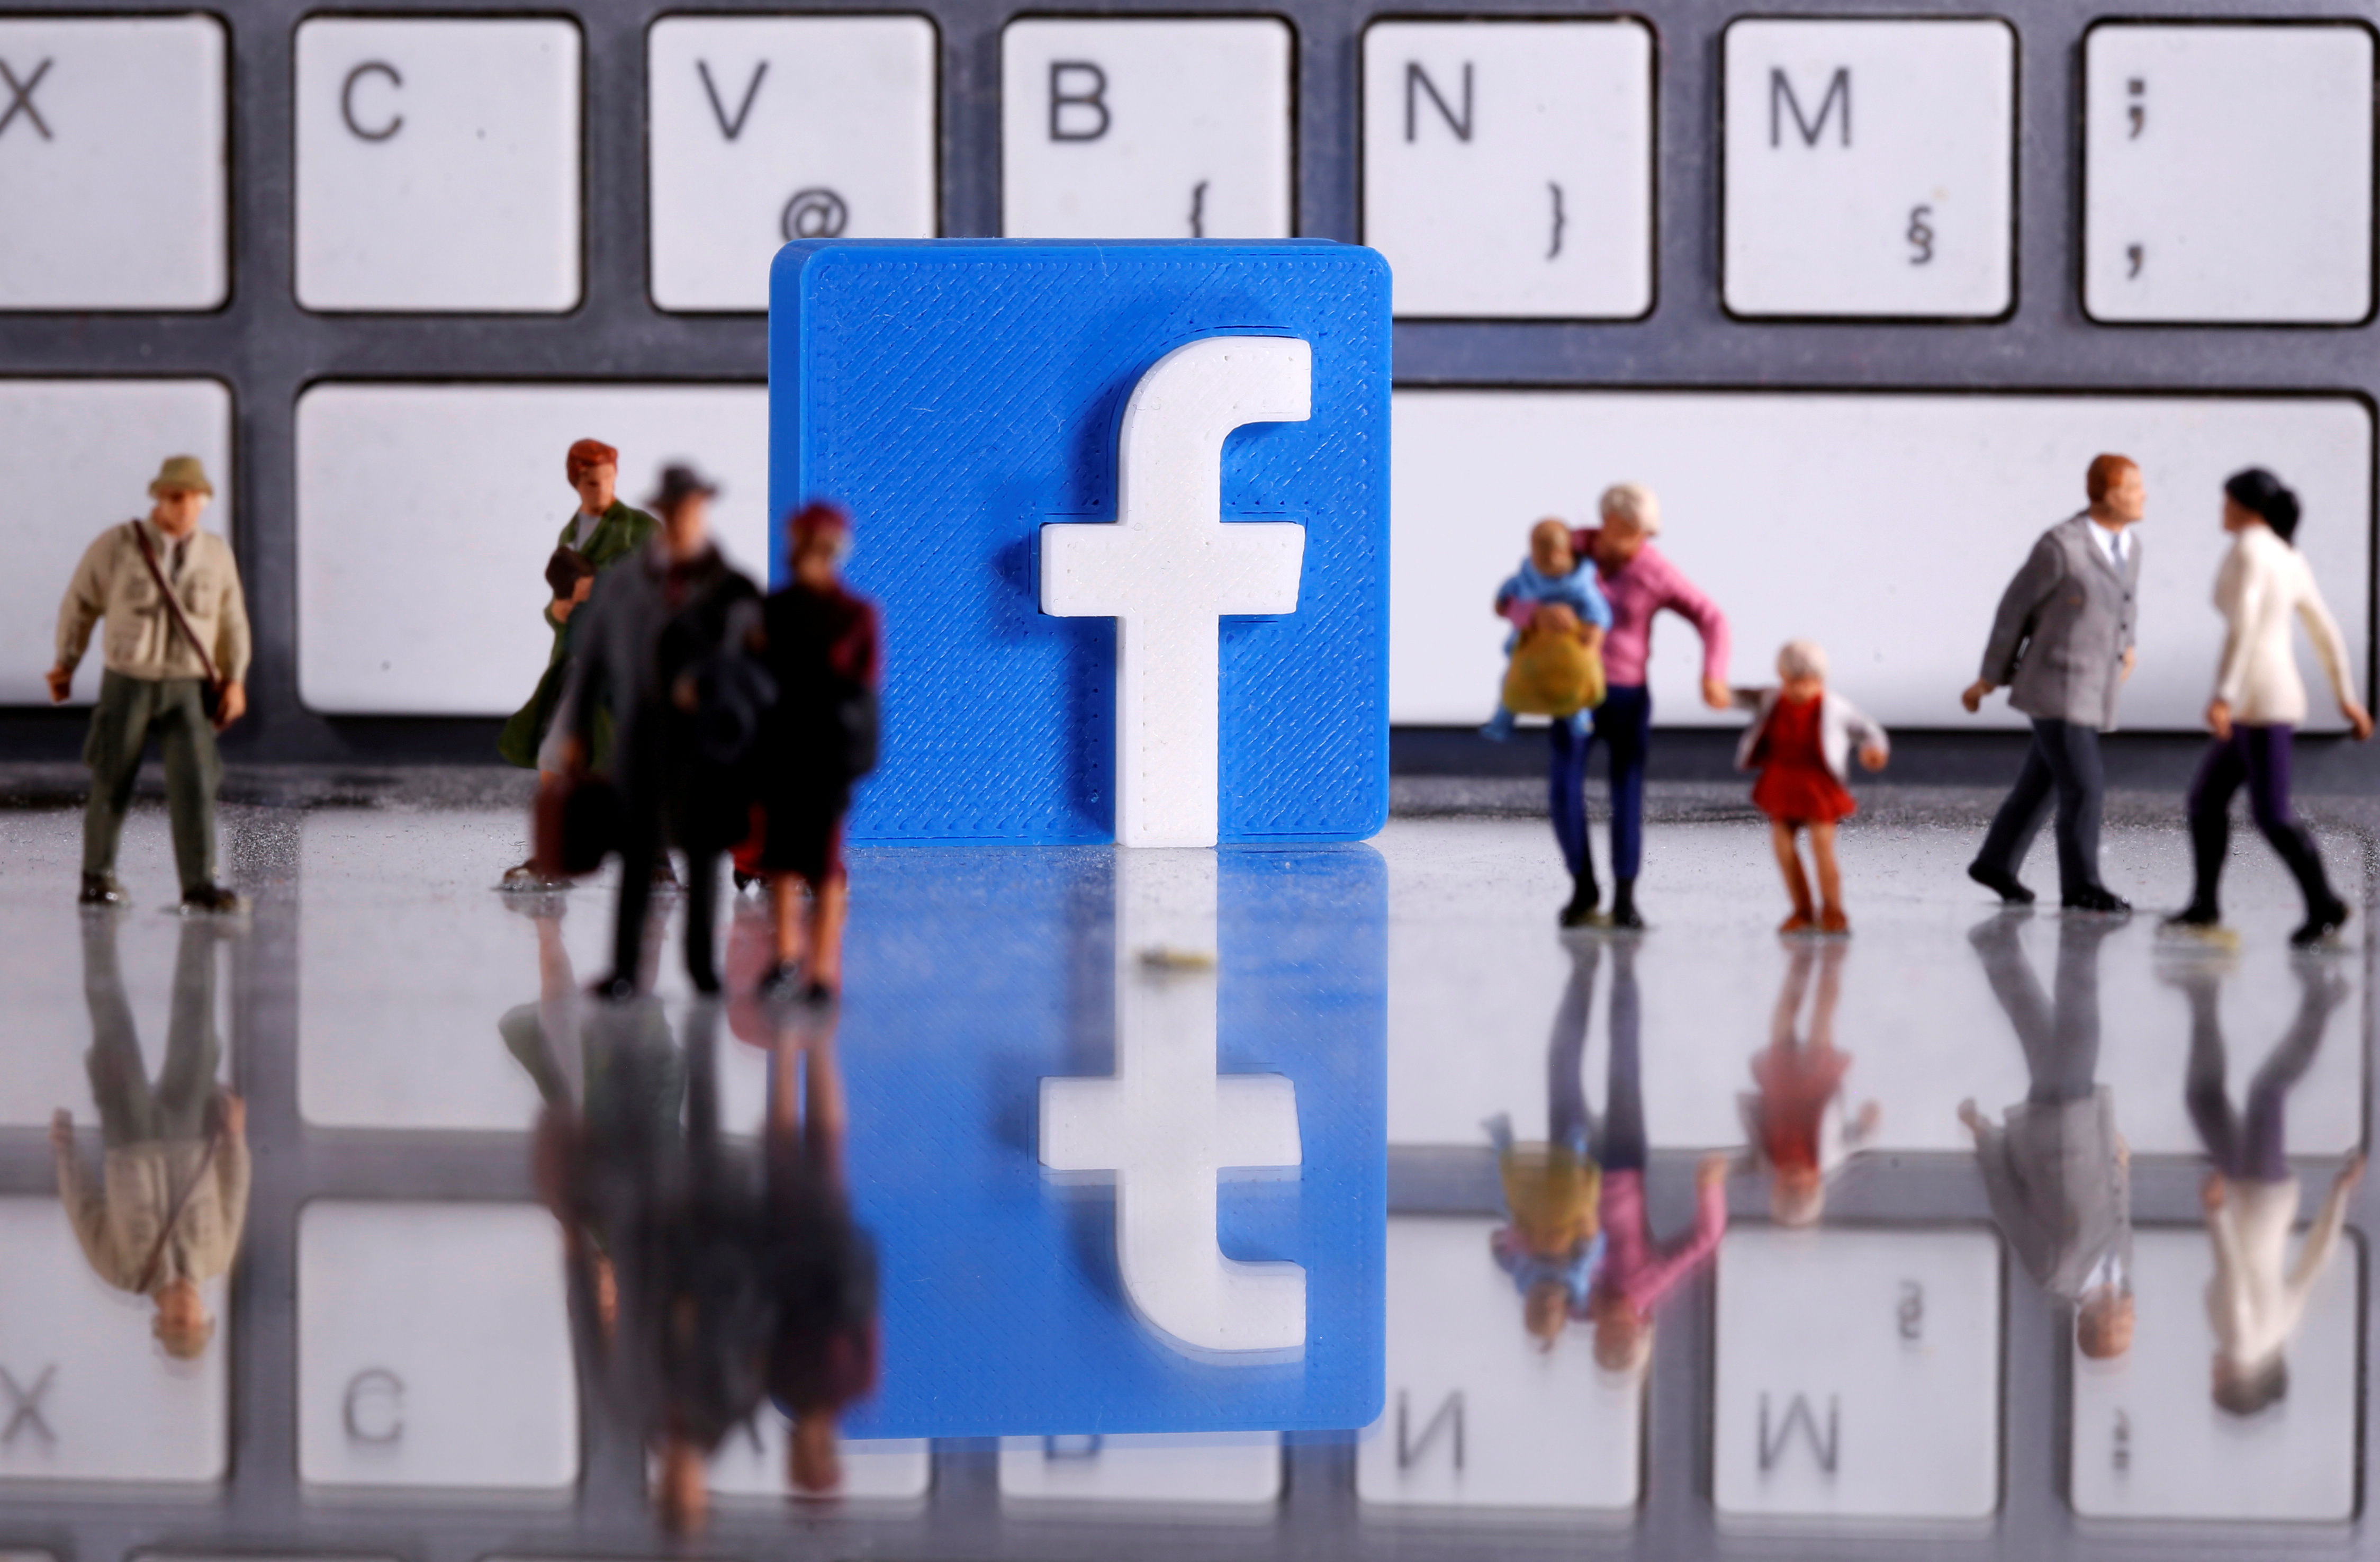 A 3D-printed Facebook logo is placed between small toy people figures in front of a keyboard in this illustration taken April 12, 2020. REUTERS/Dado Ruvic/Illustration/File Photo